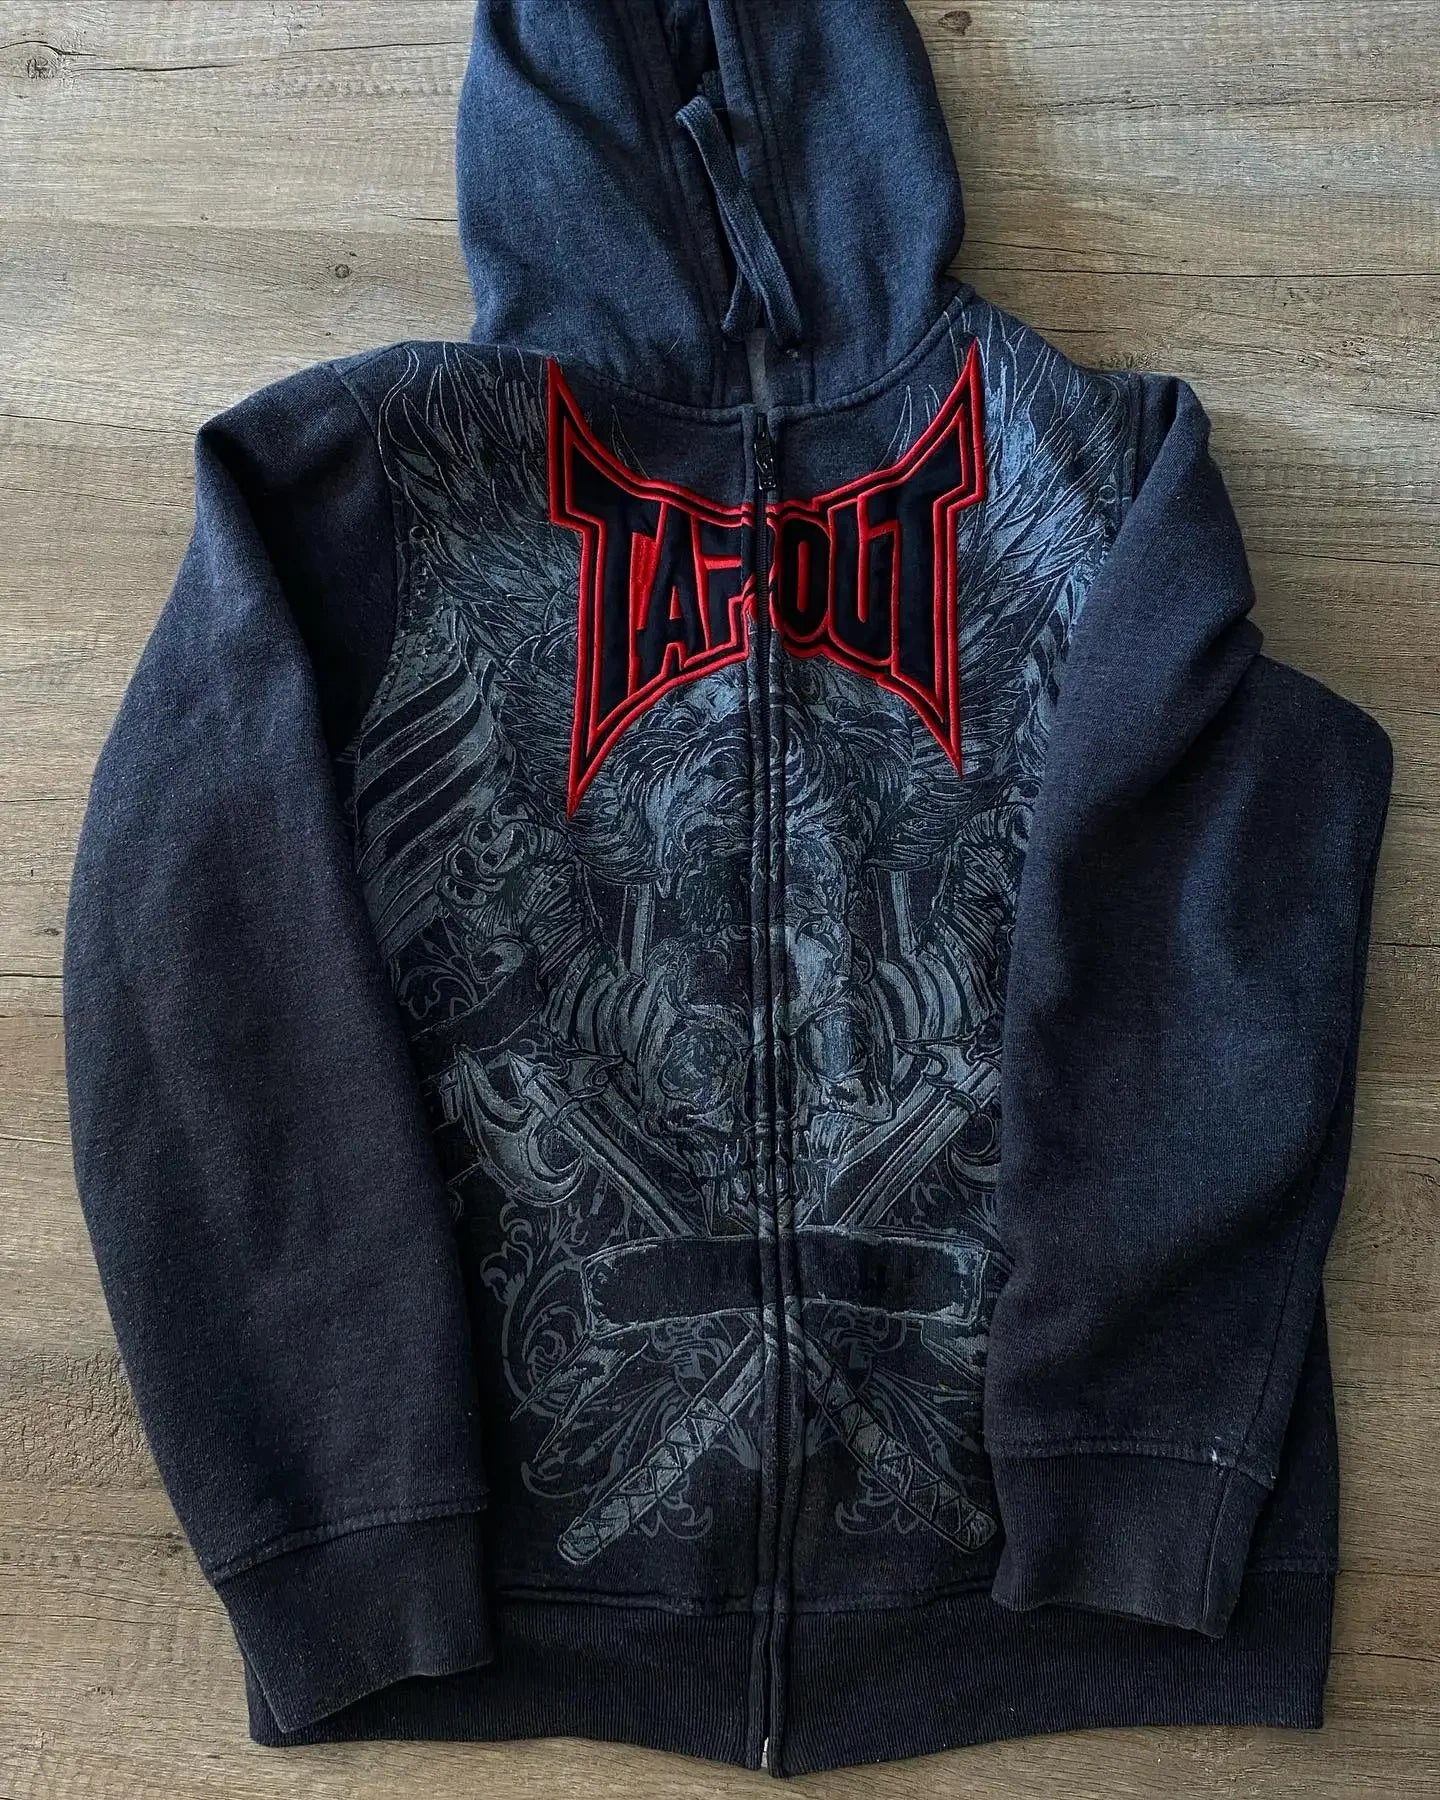 A **Gothic Skull Pattern Zip Up Hoodies Men Y2K Embroidery Hip Hop Long Sleeve Loose Hooded Streetwear Sweatshirt Casual Vintage New** with a detailed skull pattern design, featuring the word "Tapout" in red lettering on the front. The sweatshirt, from **Maramalive™**, is laid flat on a wooden surface.